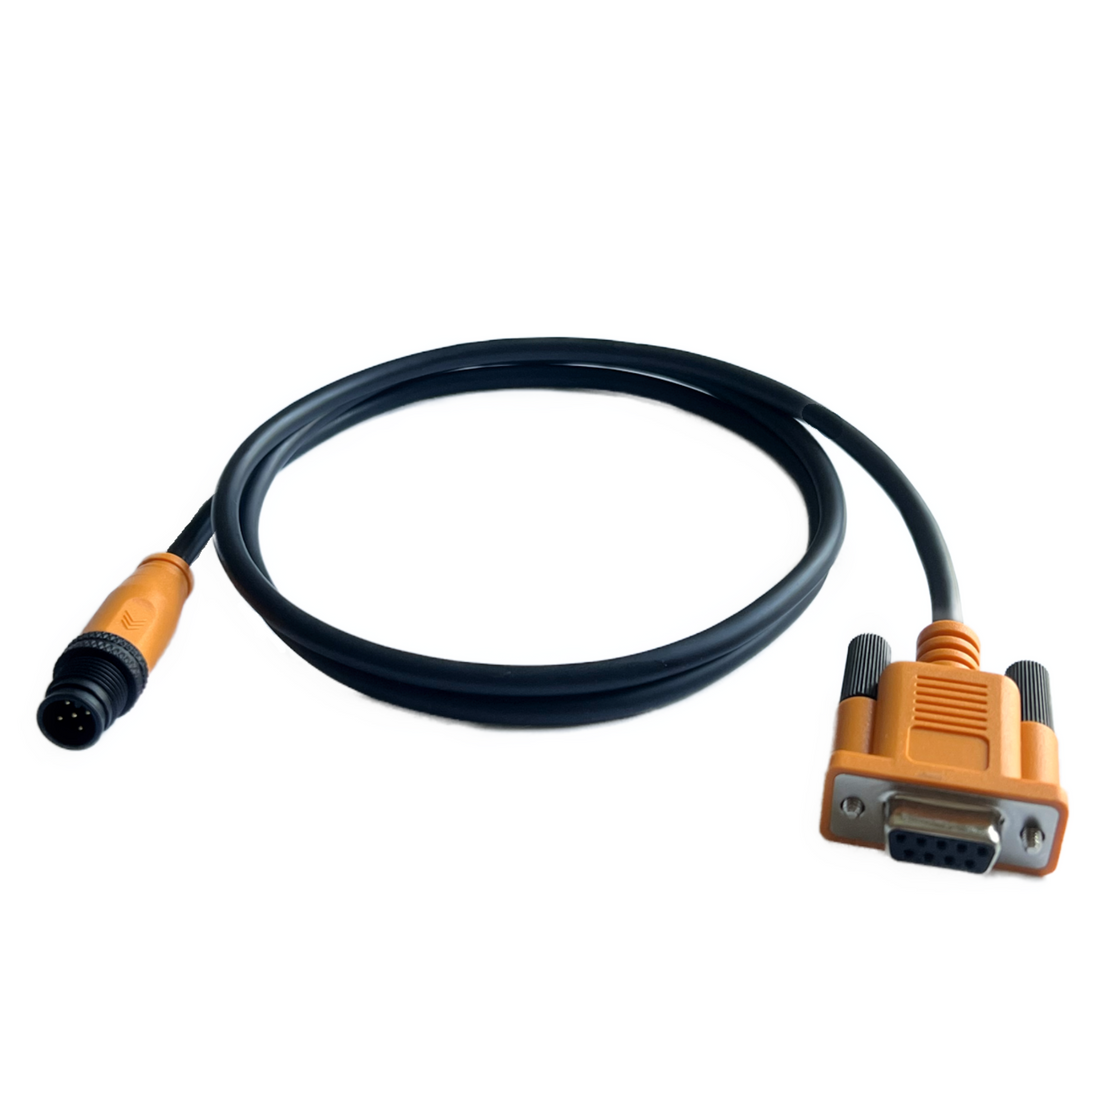 NMEA 2000 Data logger adapter cable (2.0 M / 6.56 ft)